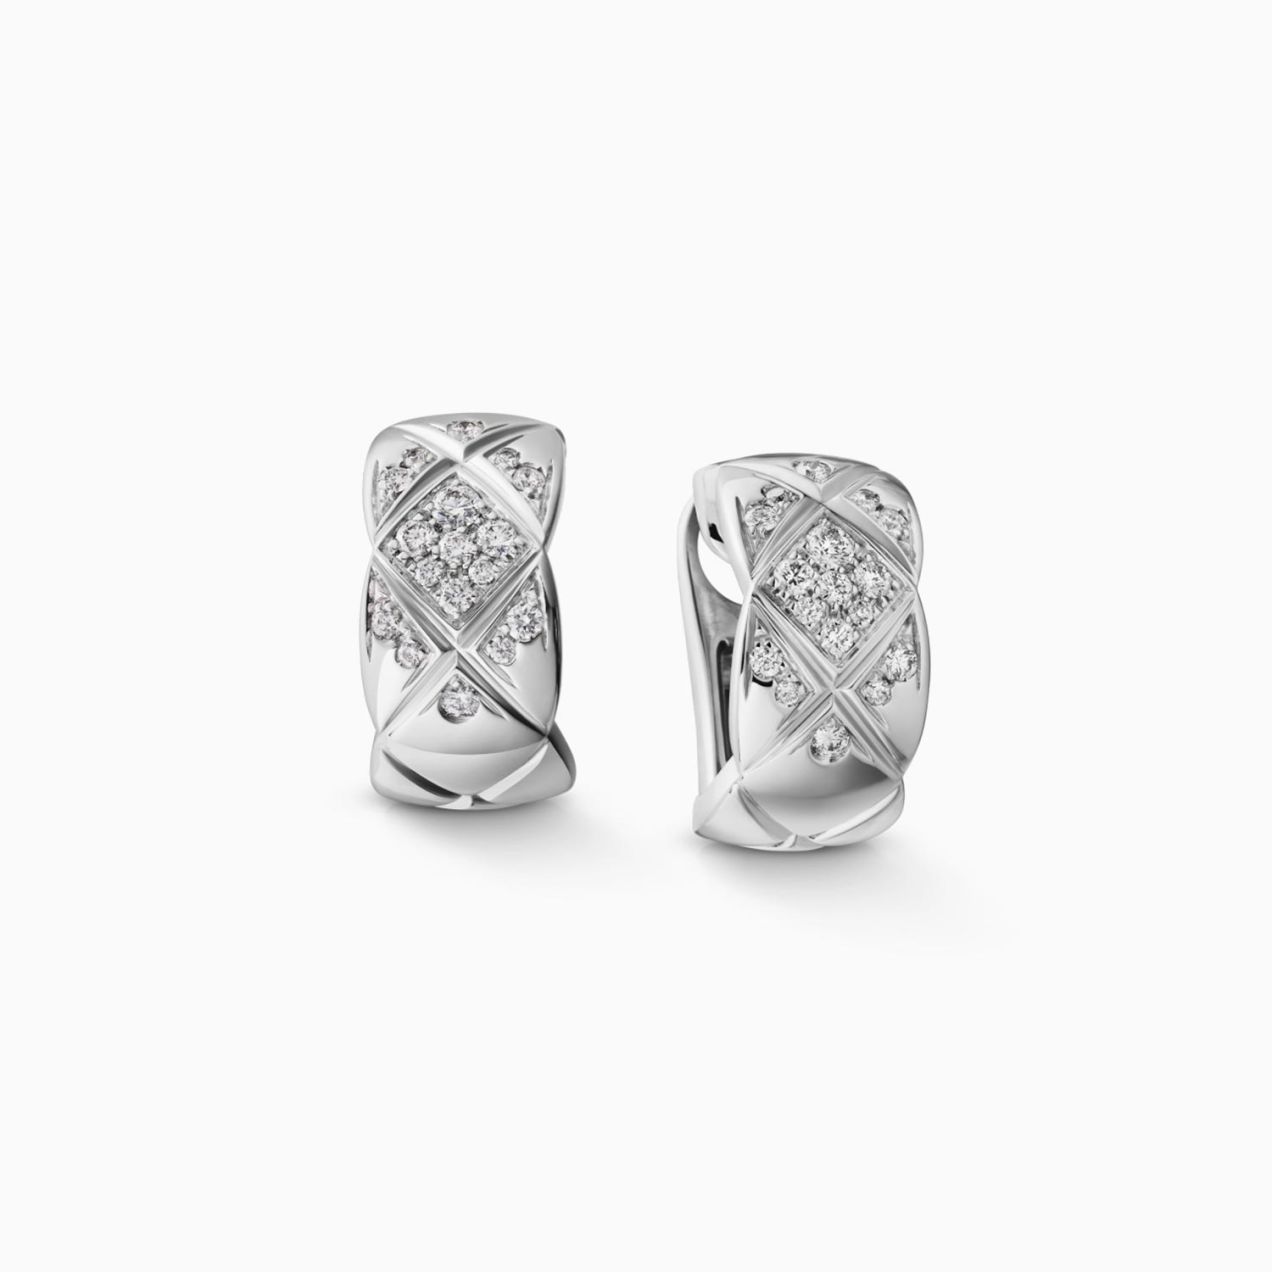 Earrings CHANEL Coco Crush white gold with diamonds